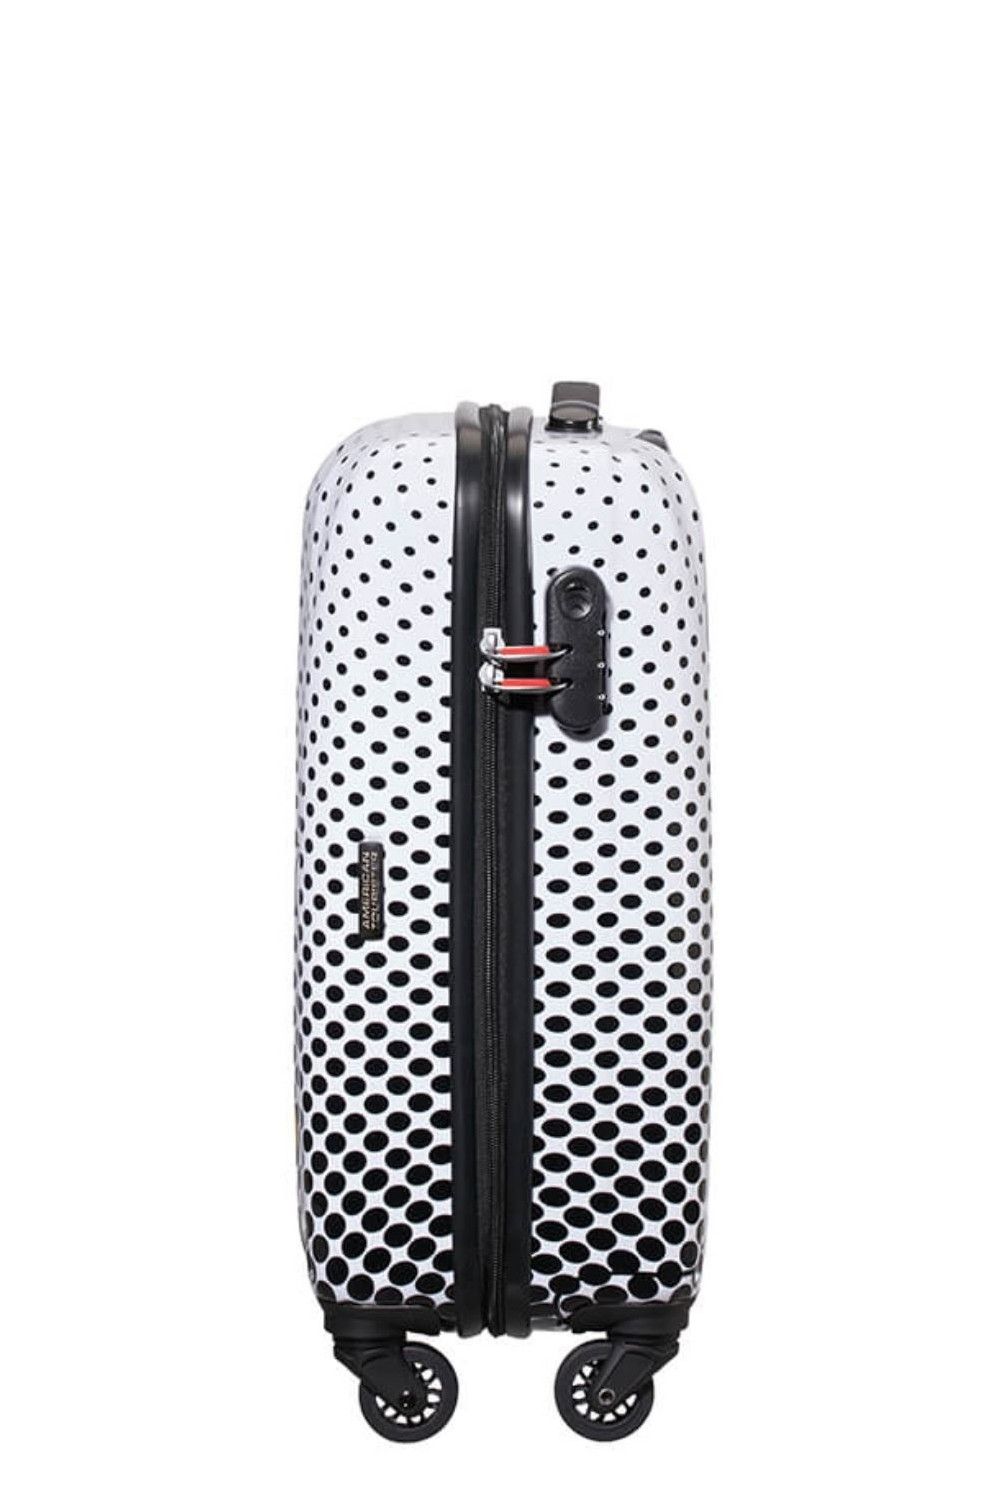 AT Mickey Polka Dot 55x40x20cm carry-on luggage